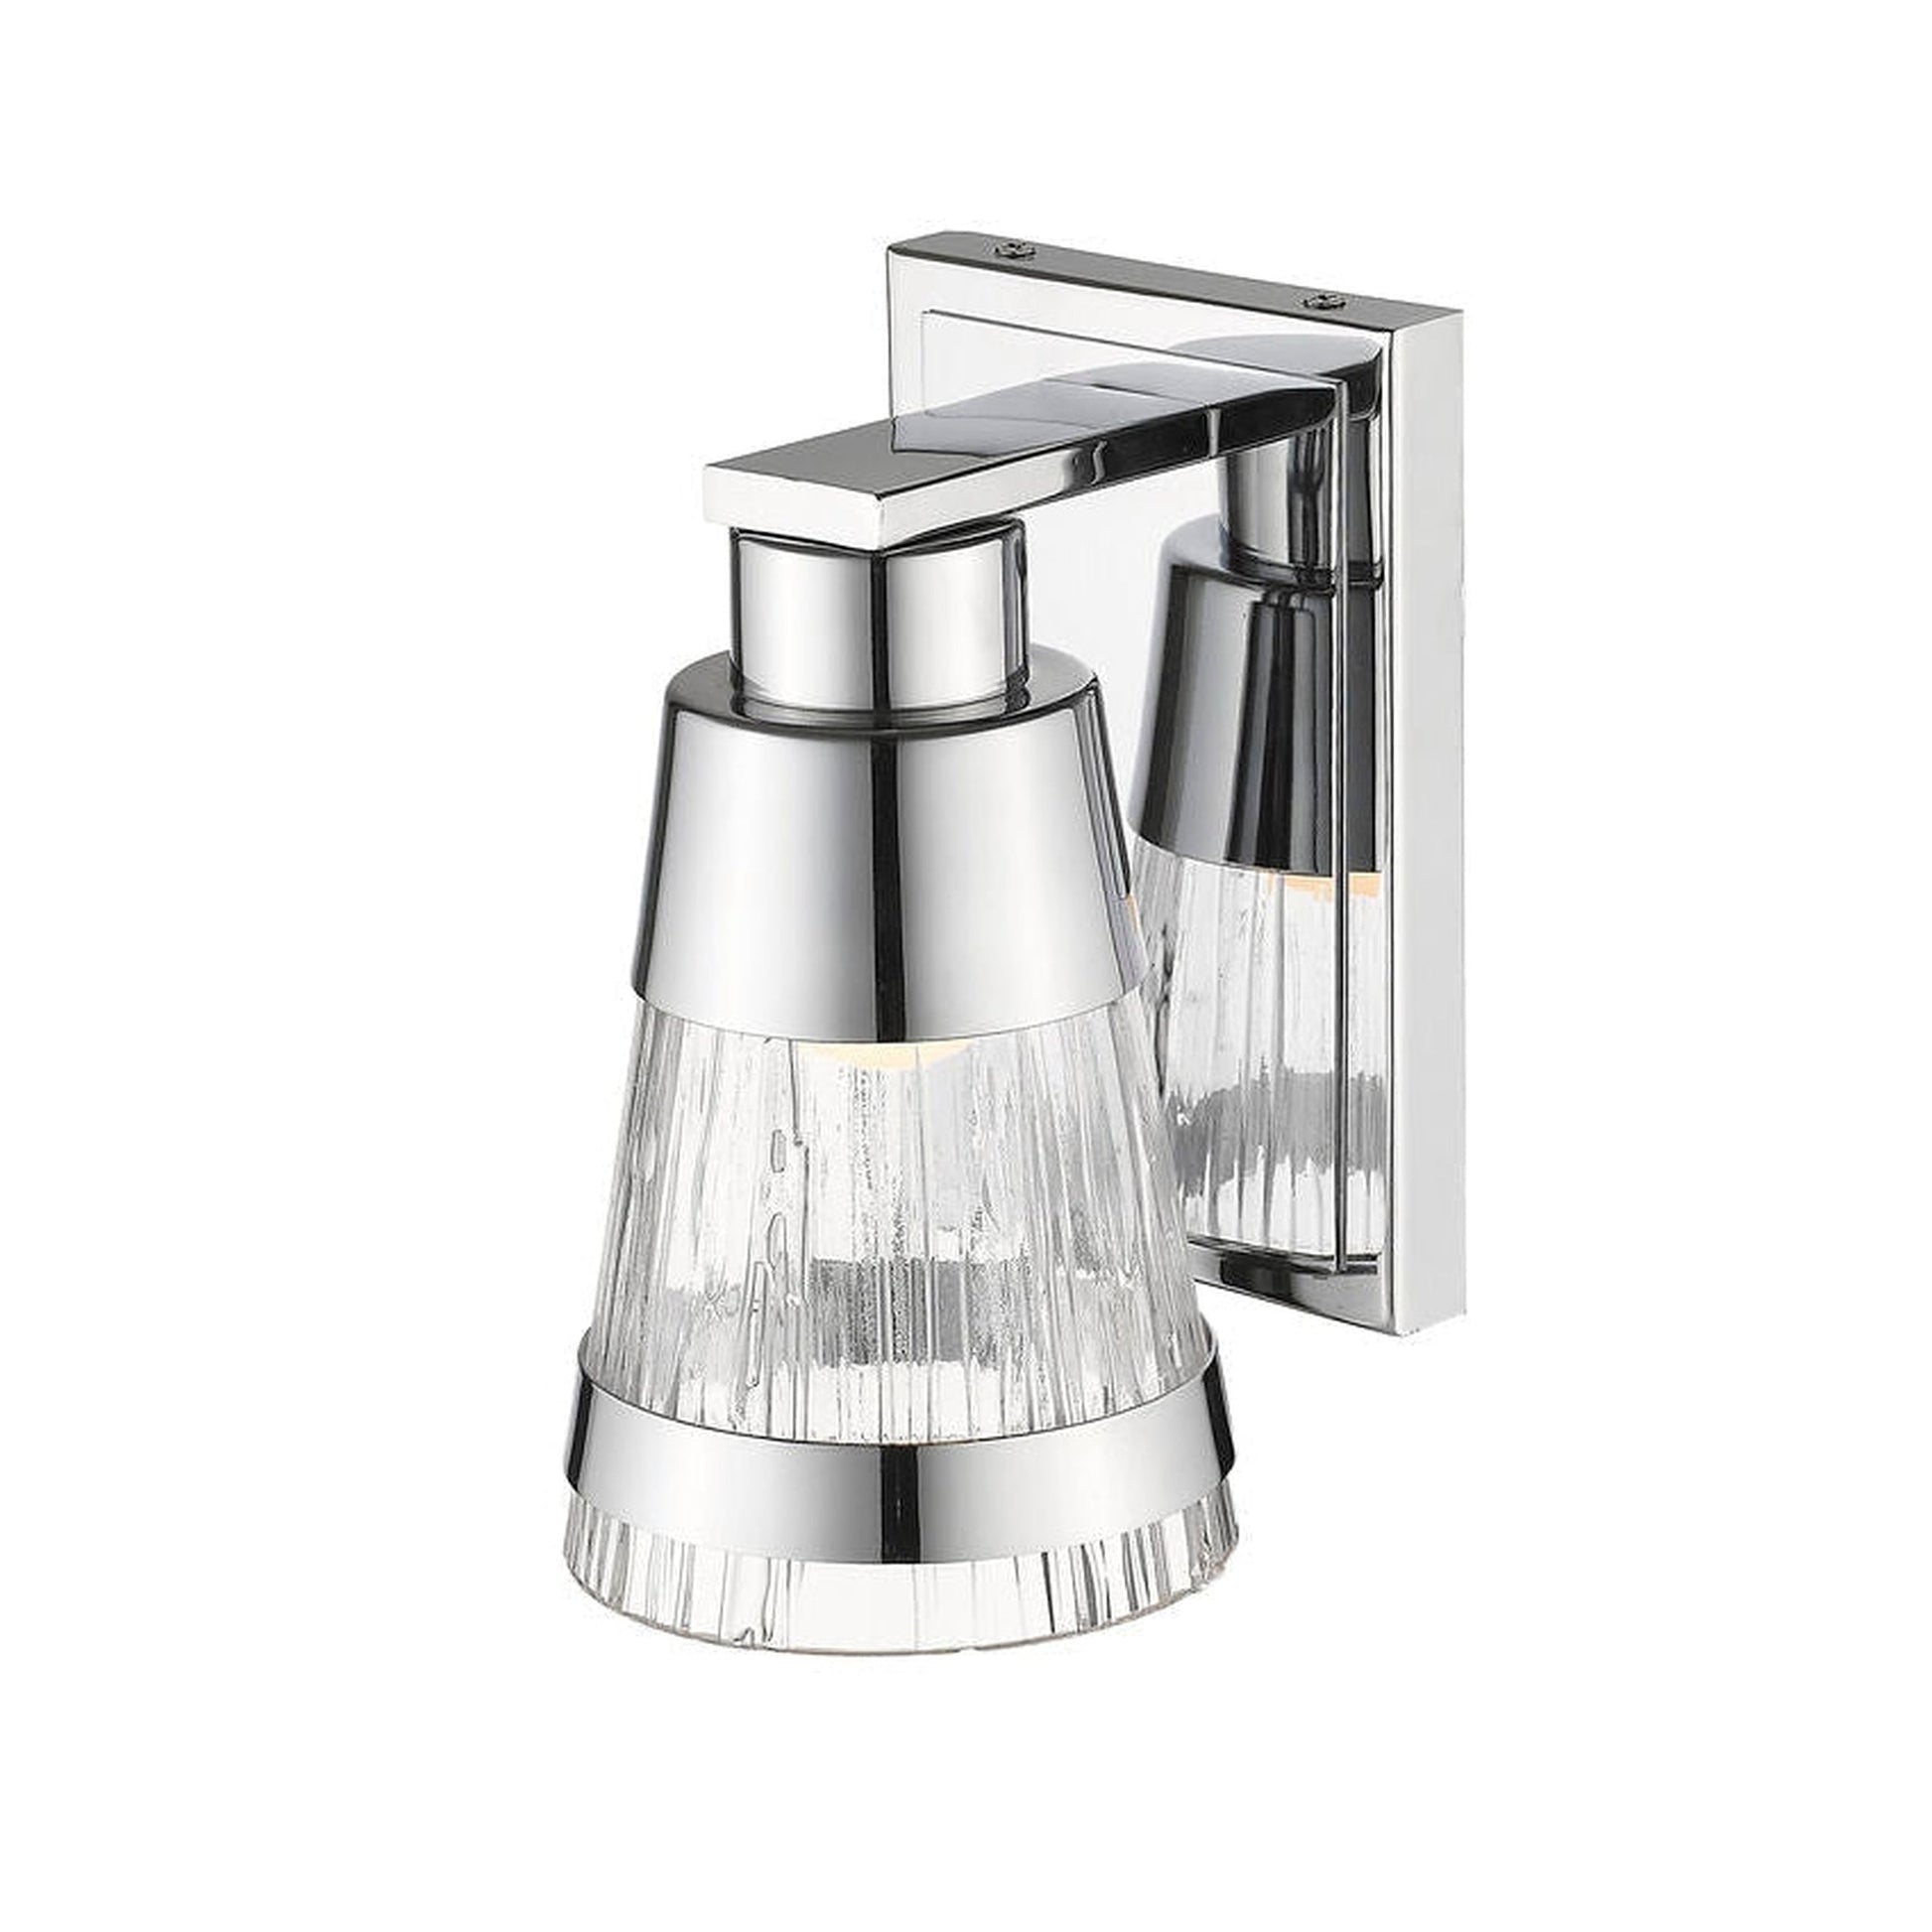 Z-Lite Ethos 5" 1-Light LED Chrome Wall Sconce With Chisel Glass Shade